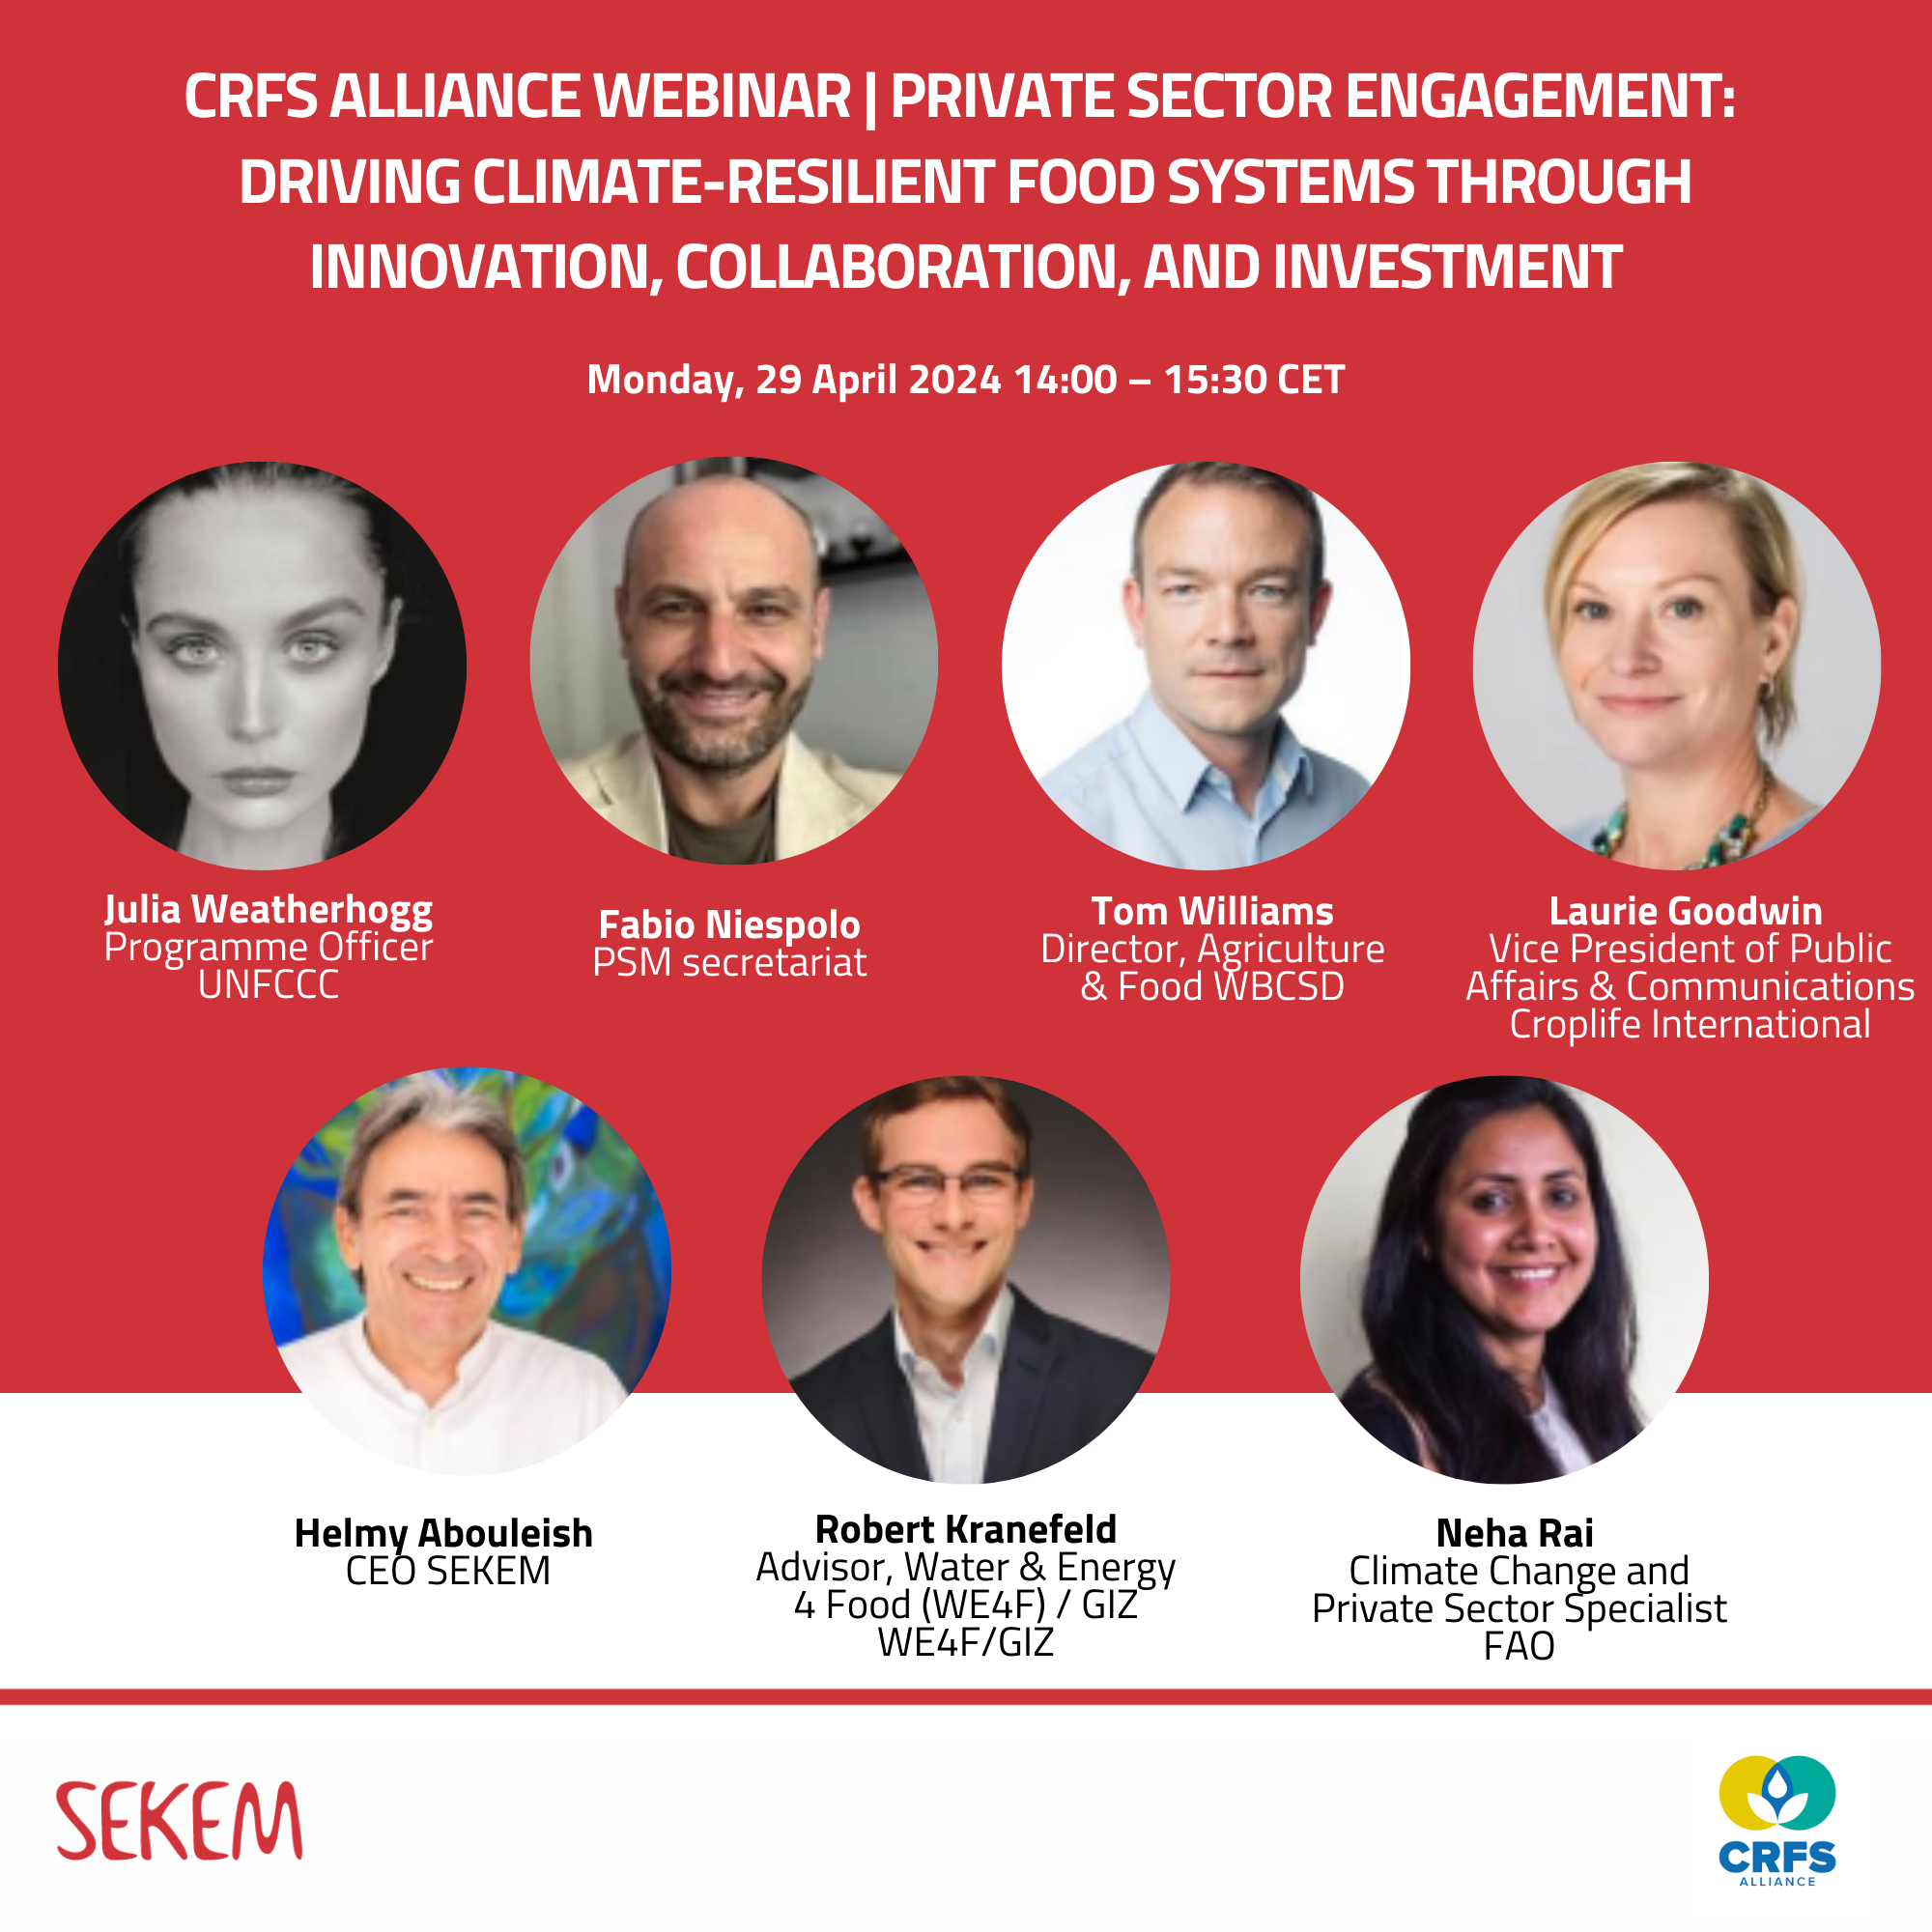 April Highlights: Mr. Helmy Abouleish speaks at the CRFS Alliance webinar on Private Sector Engagement